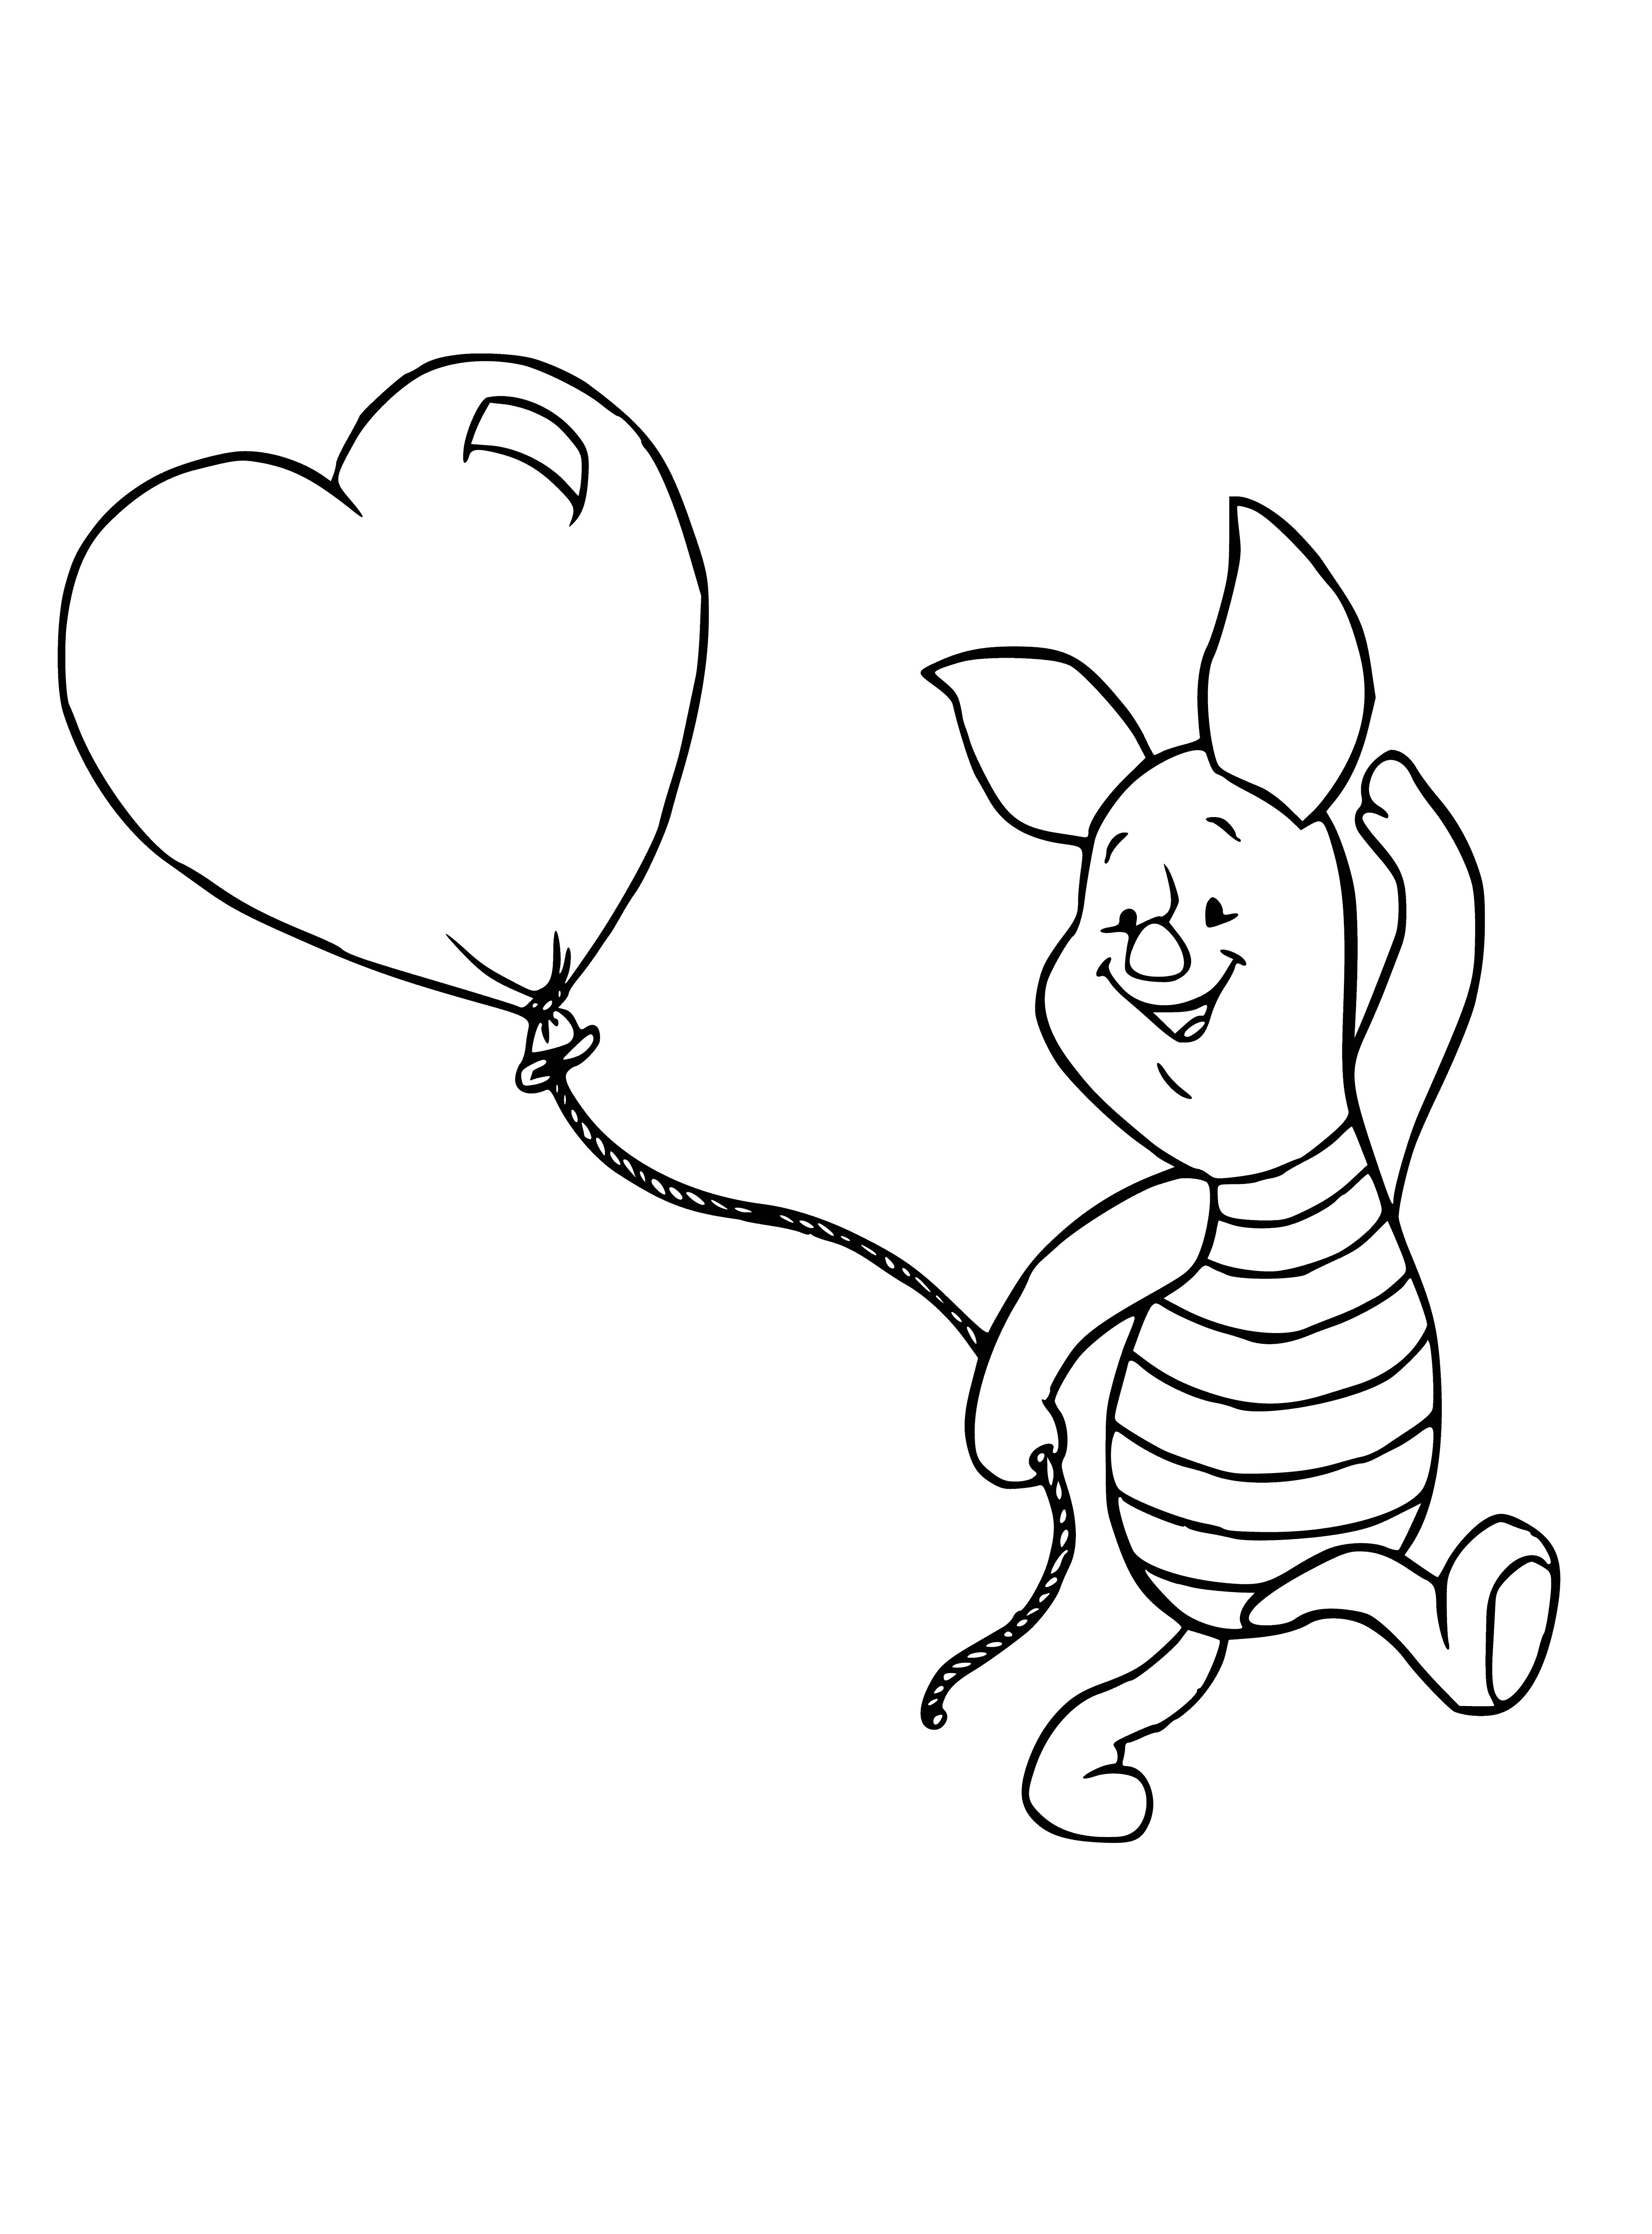 coloring page: Pig with ball in its mouth lies on ground, ball is orange with white stripes. #coloring #pages